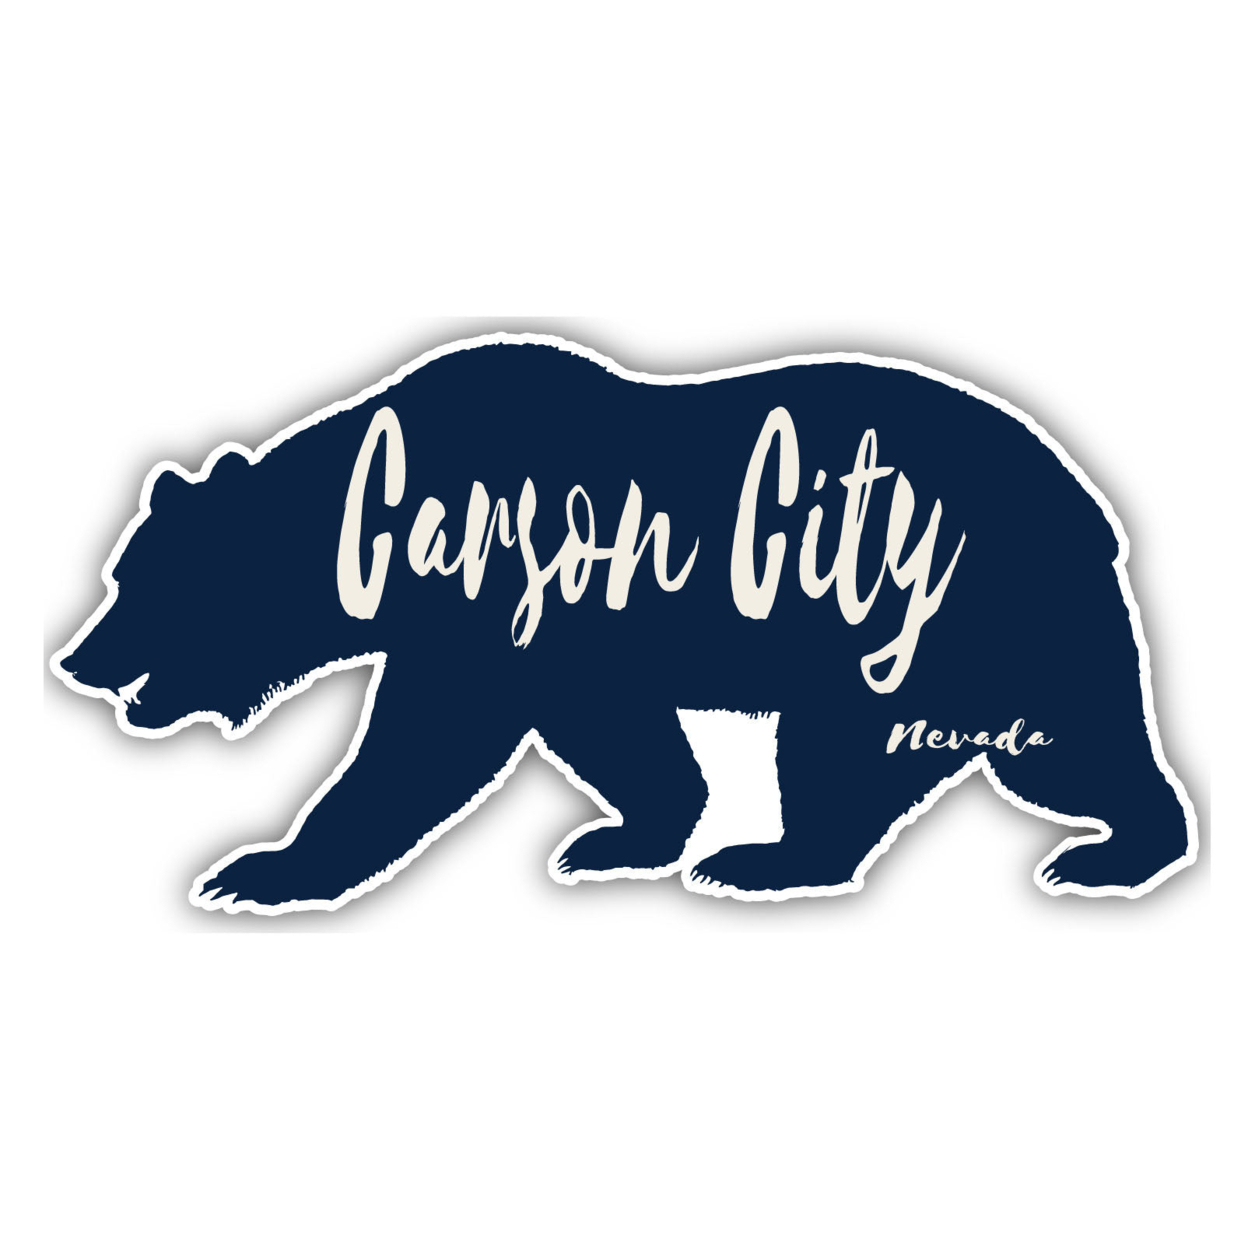 Carson City Nevada Souvenir Decorative Stickers (Choose Theme And Size) - 4-Pack, 2-Inch, Bear